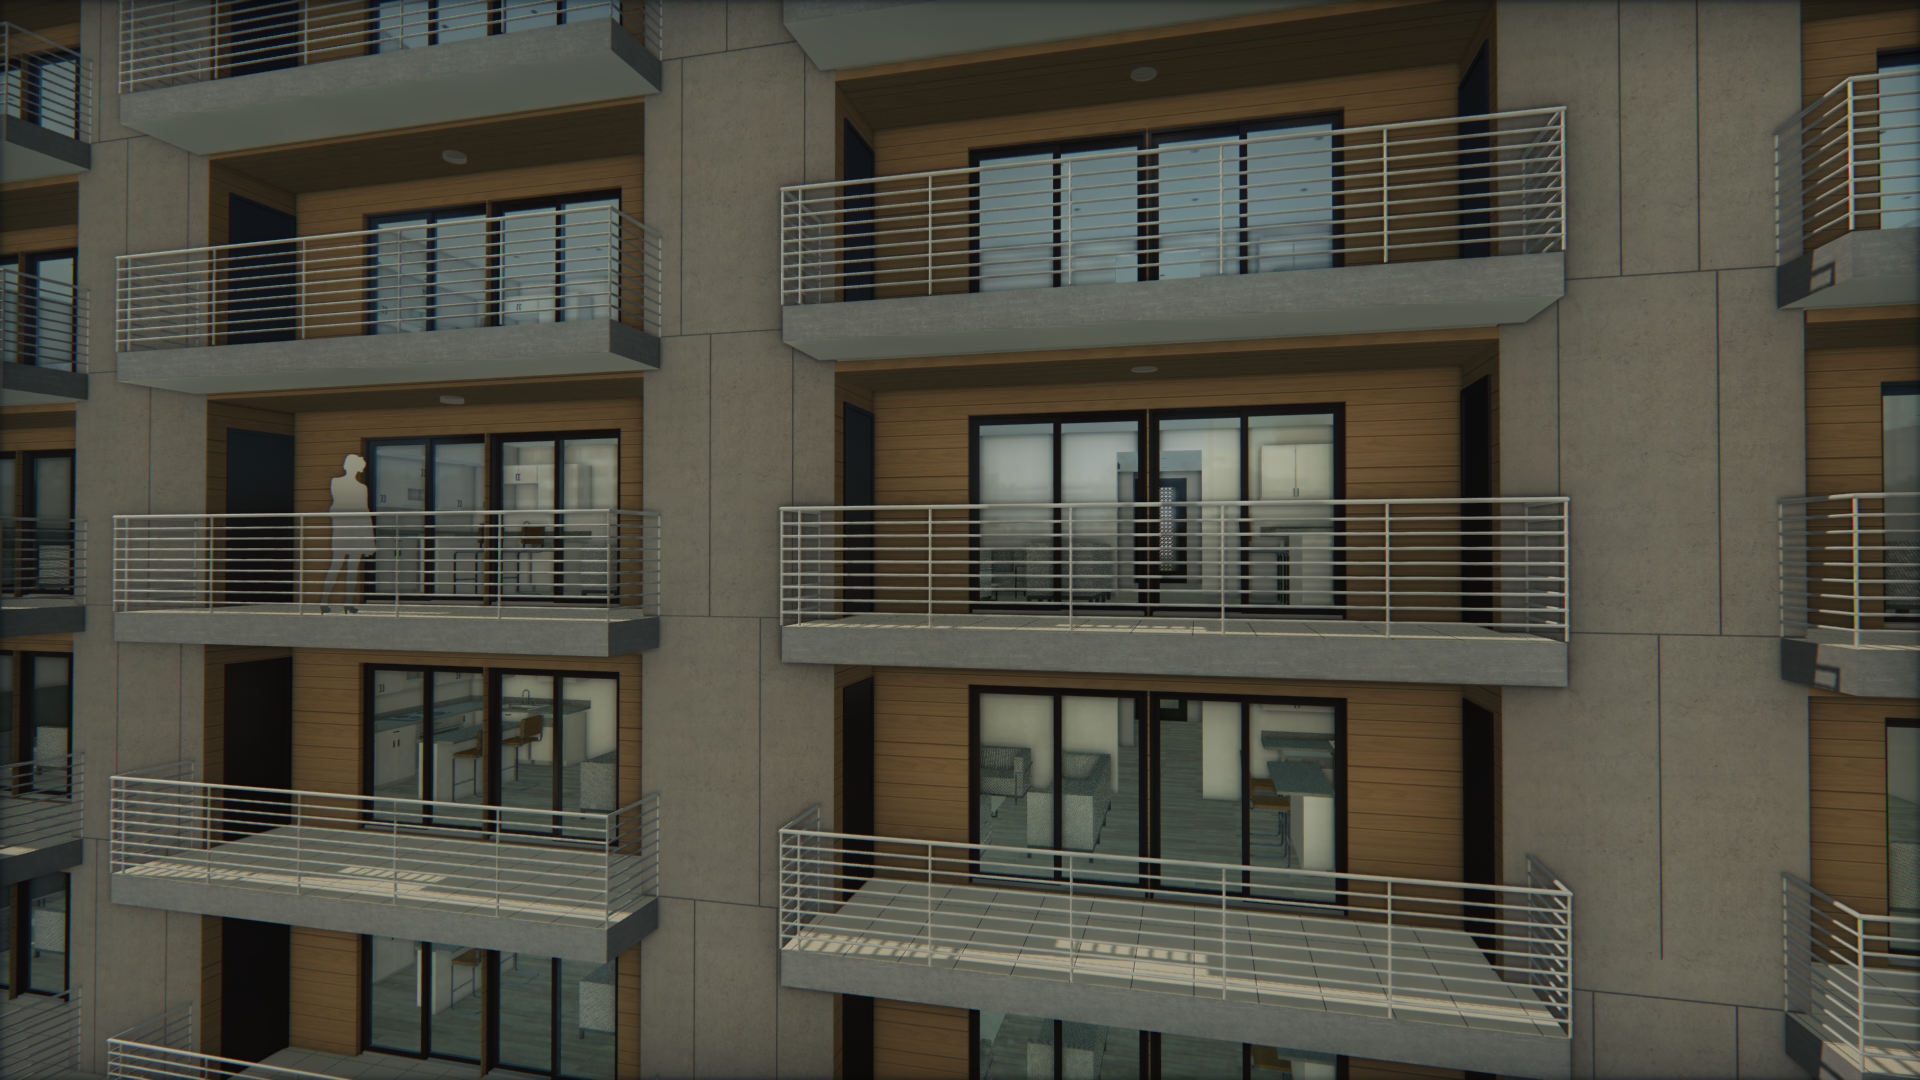 Balconies with people at 178 North Halstead development